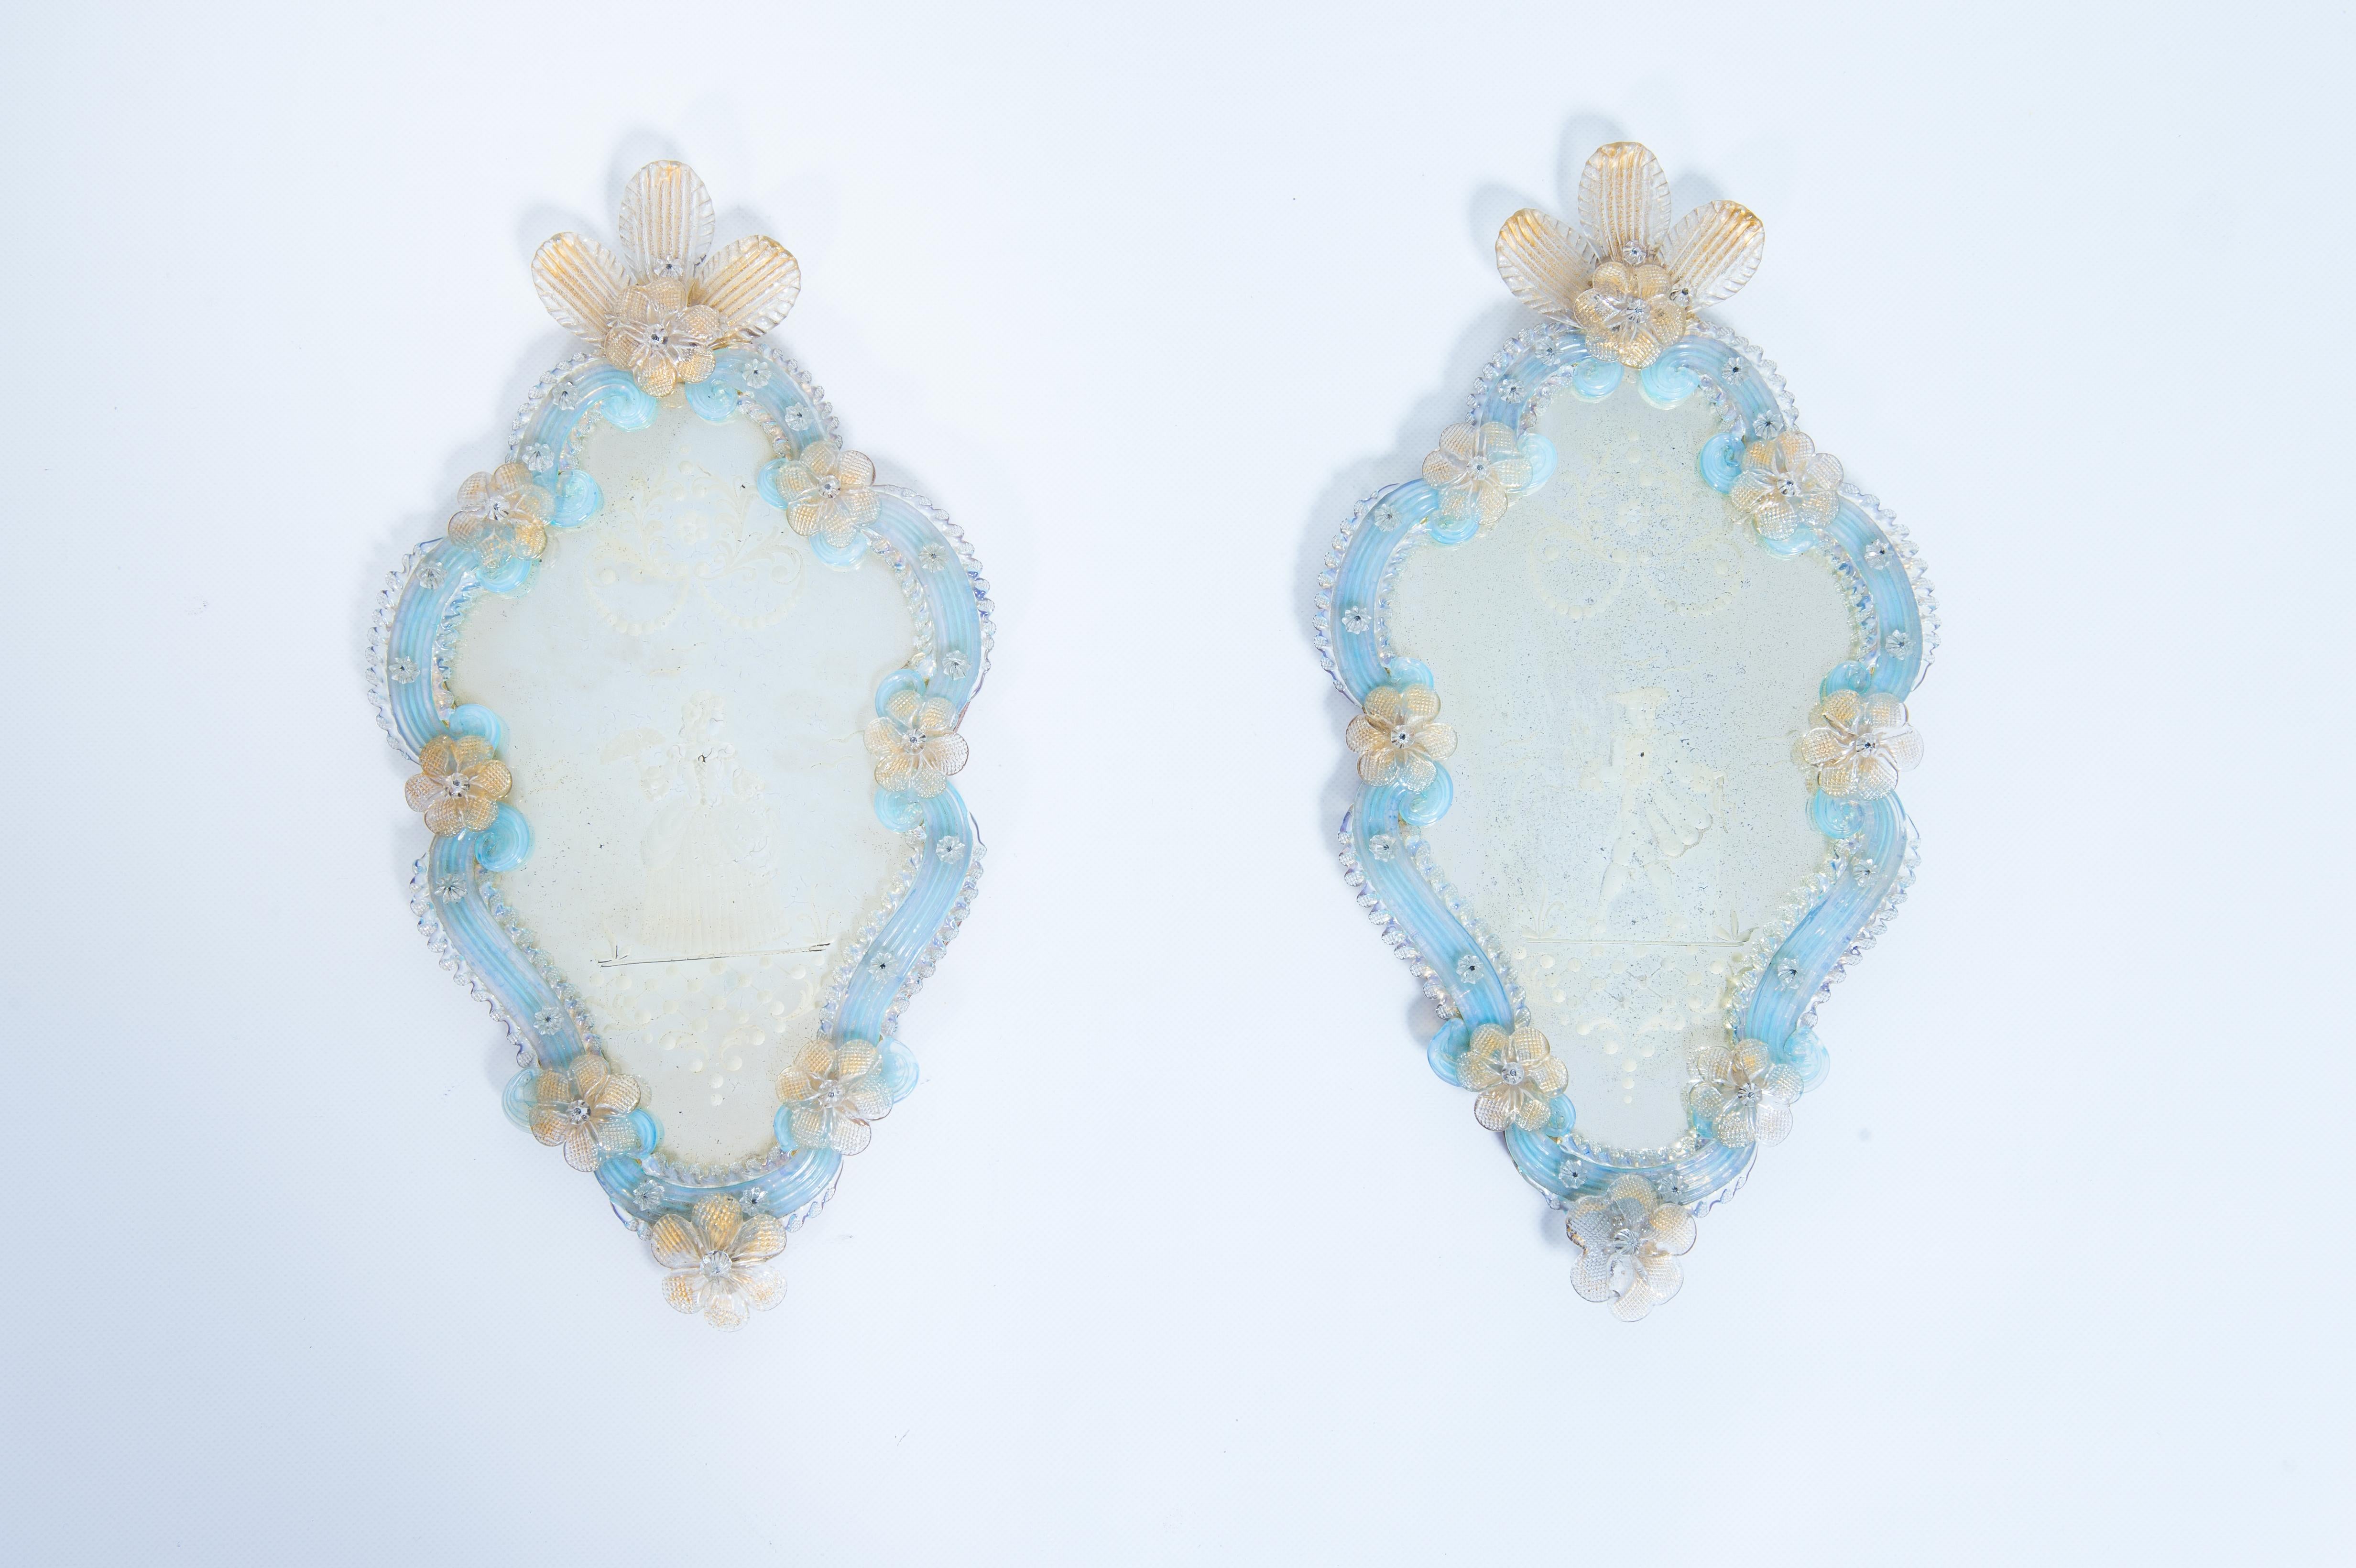 Pair of Murano glass mirrors with gold finishes Venice 1900s.
This small pair of Murano glass mirrors is a classic piece of furniture entirely handmade in the Venetian island of Murano, Italy, in the 1900s.
The mirrors are engraved with a lady and